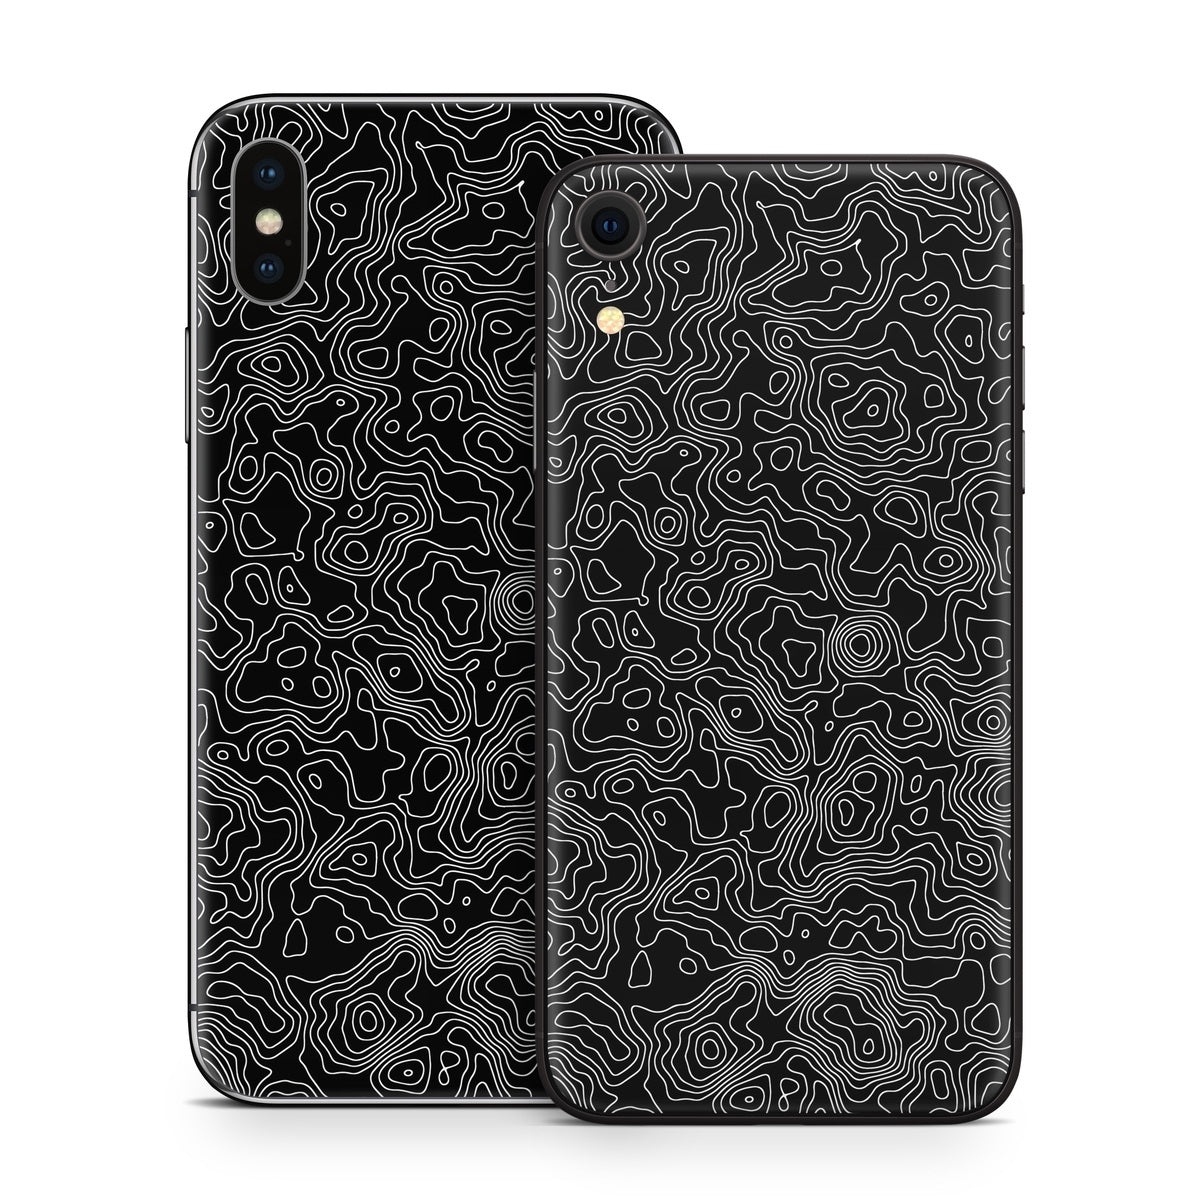 Nocturnal - Apple iPhone X Skin